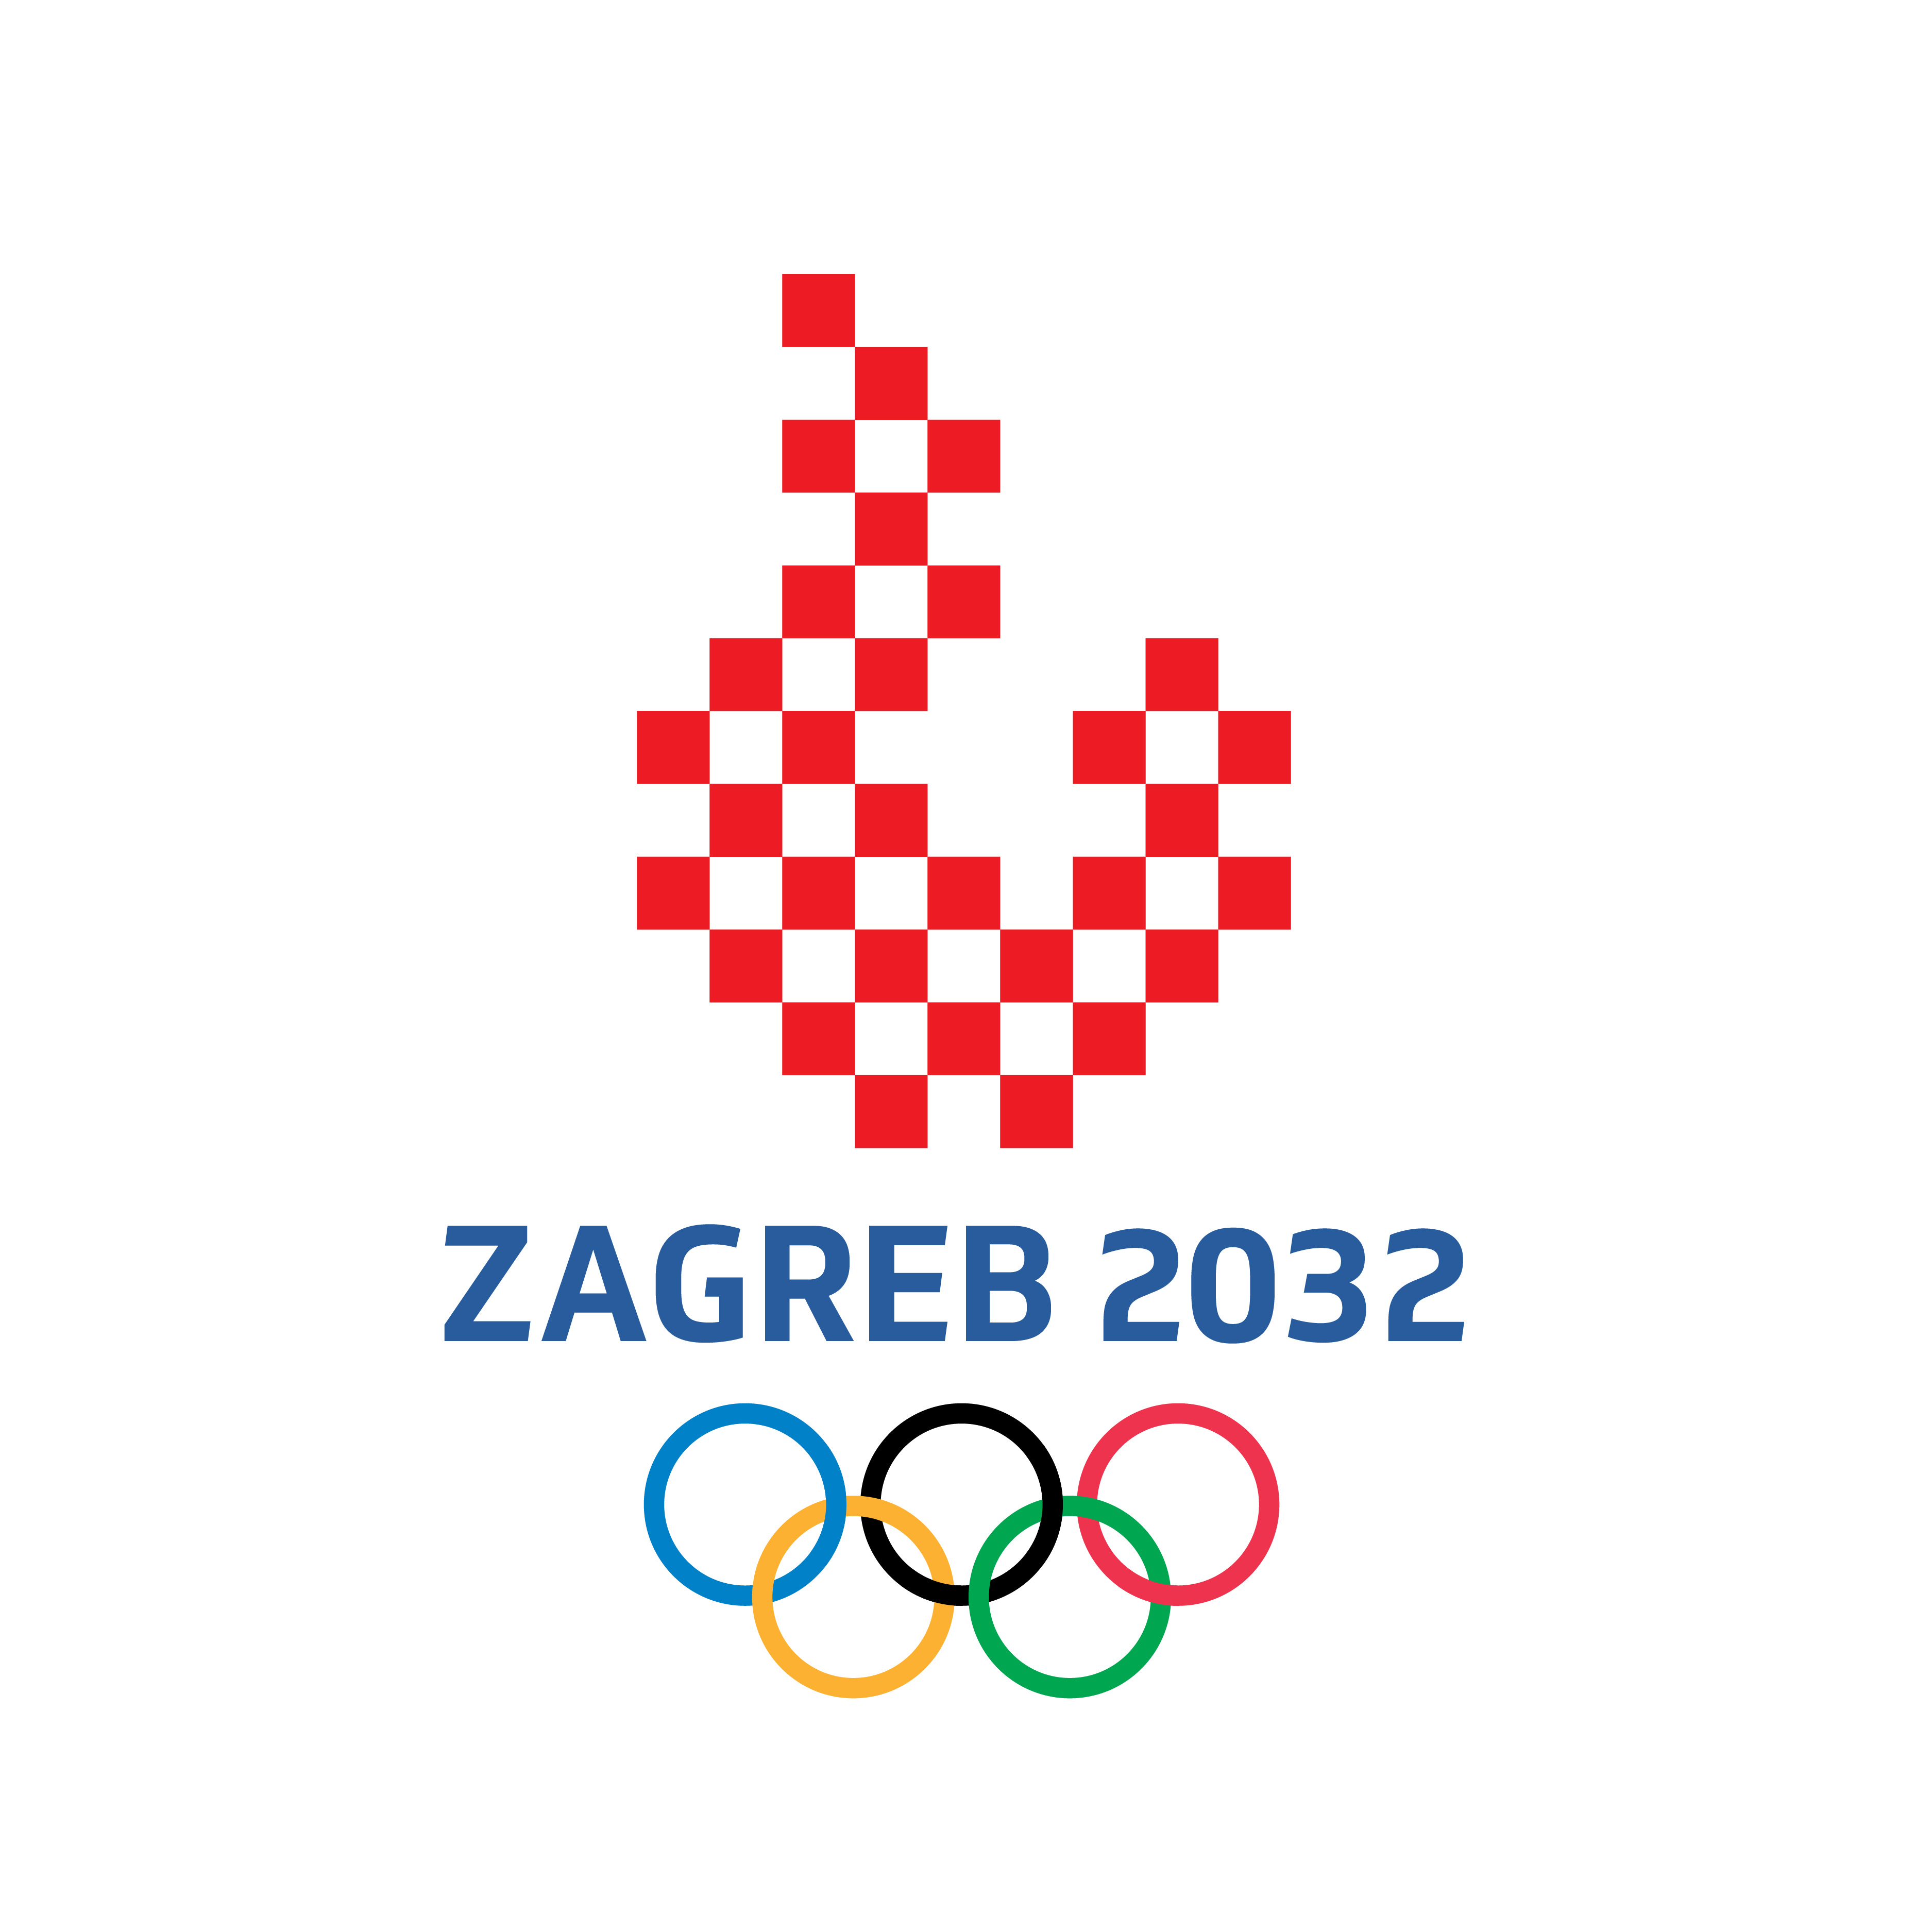 Zagreb 2032 Olympics logo design by logo designer Kenion Harvey Design for your inspiration and for the worlds largest logo competition